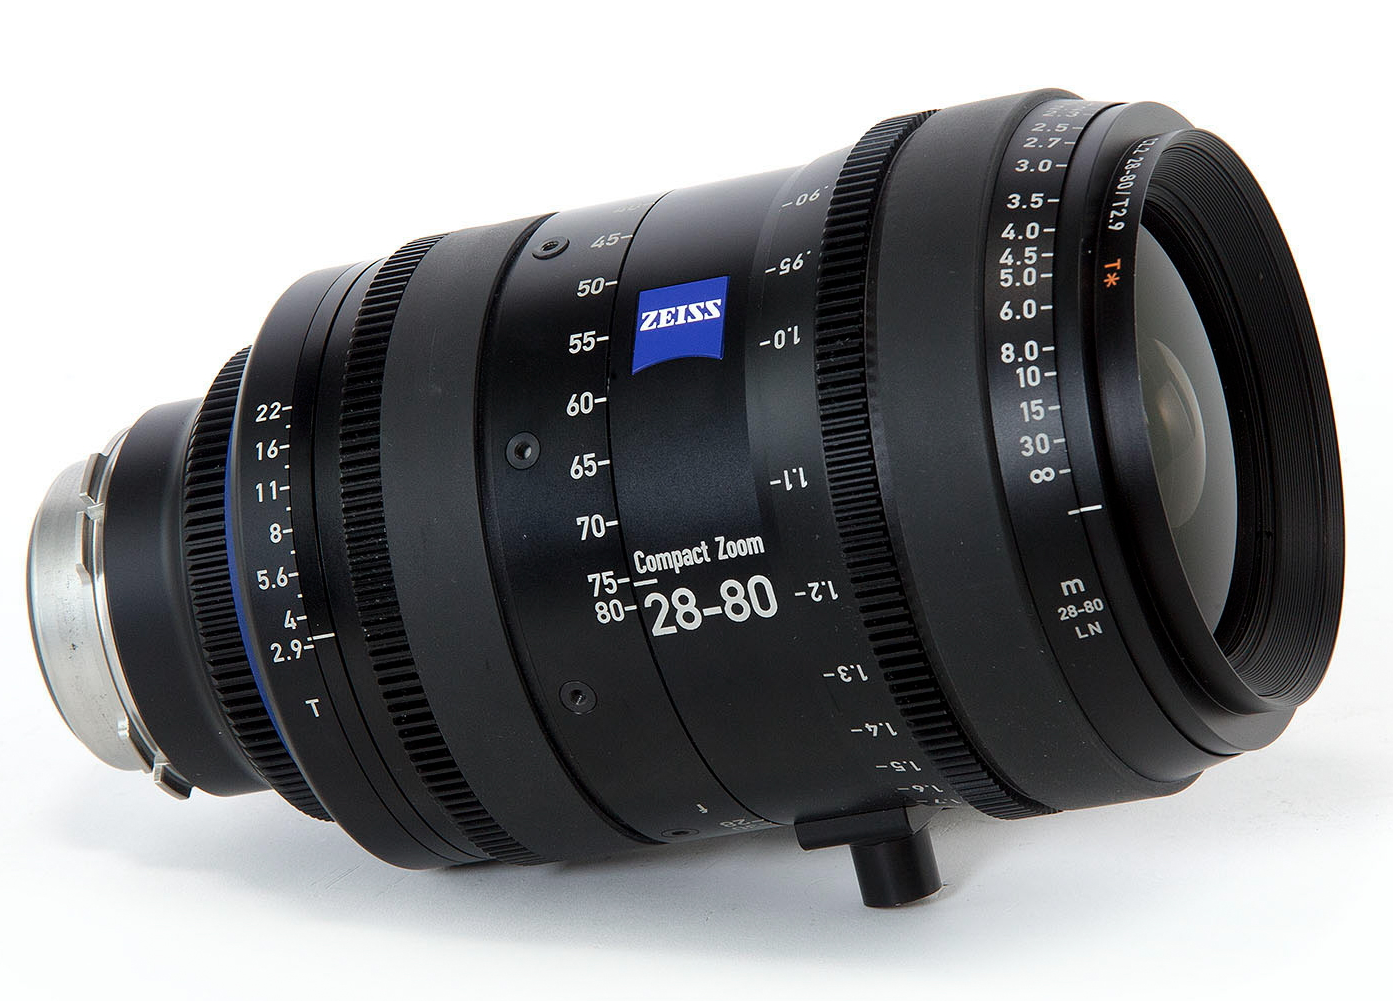 ZEISS COMPACT ZOOM 28-80MM T2.9